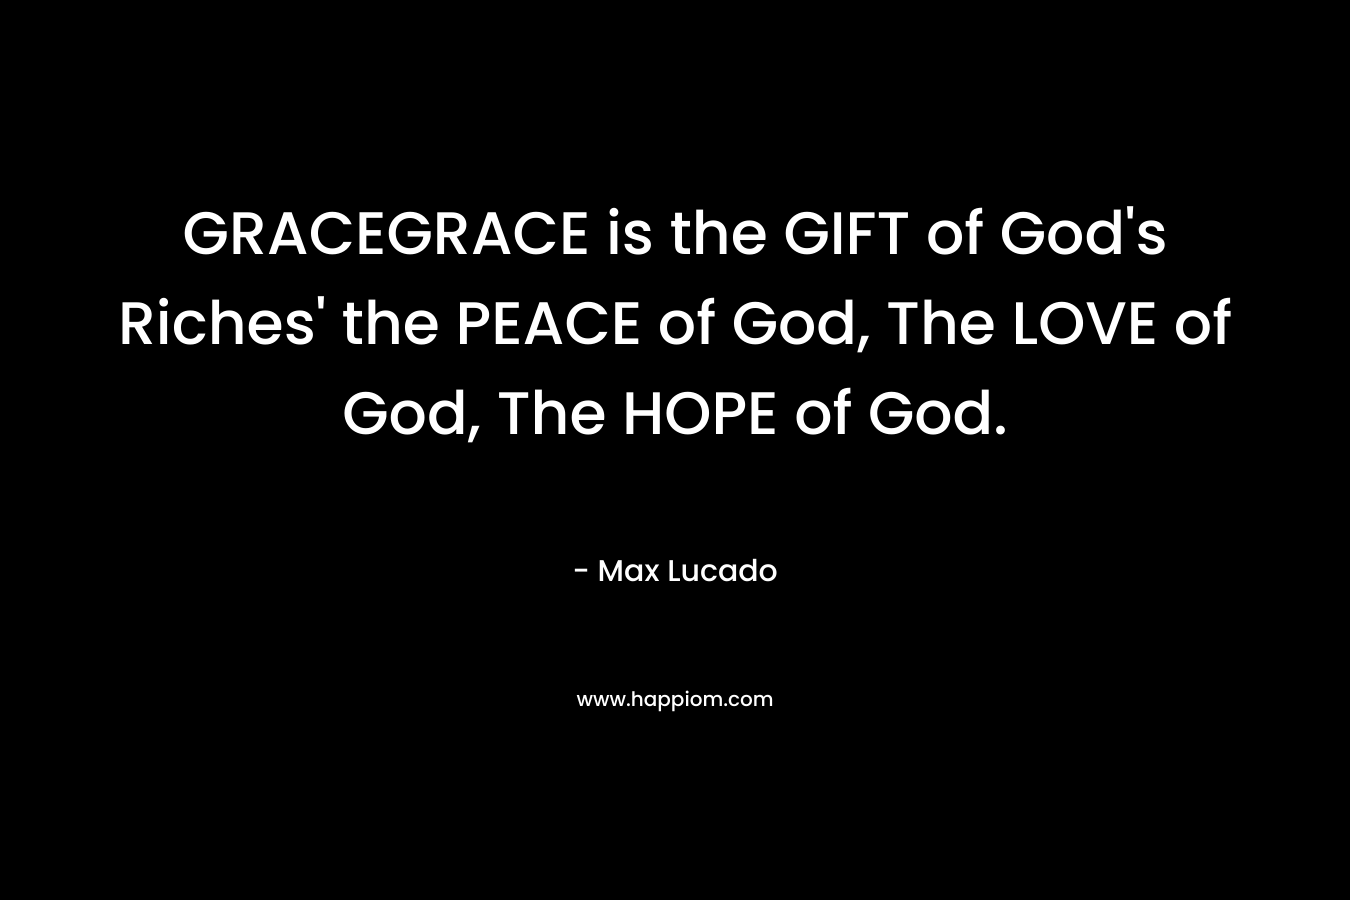 GRACEGRACE is the GIFT of God's Riches' the PEACE of God, The LOVE of God, The HOPE of God.